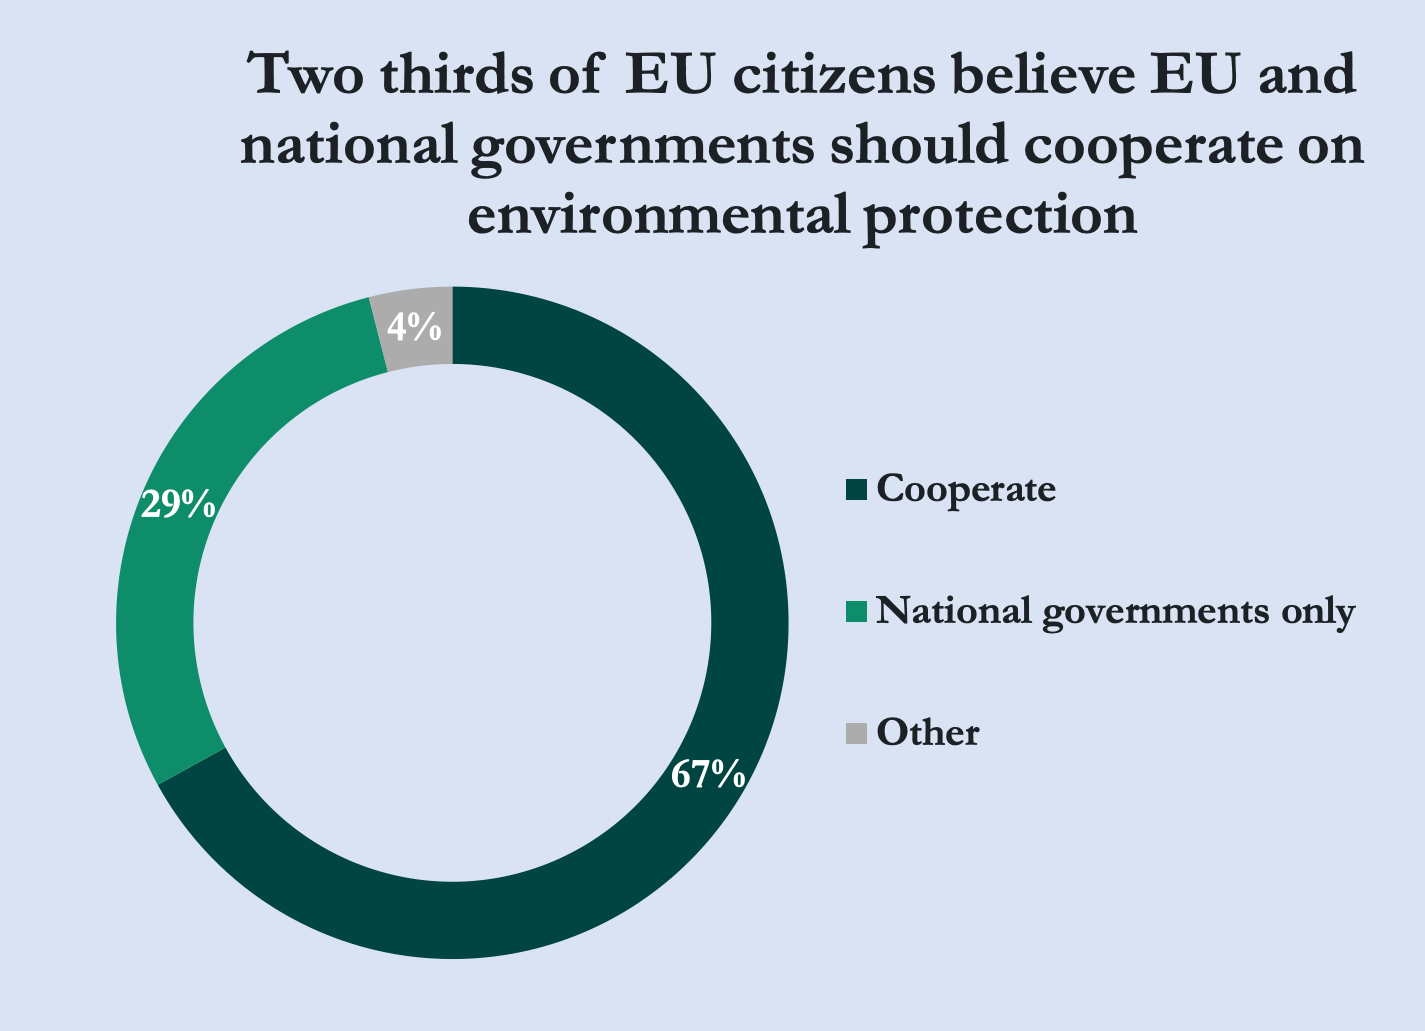 Perceived EU role in environmental protection